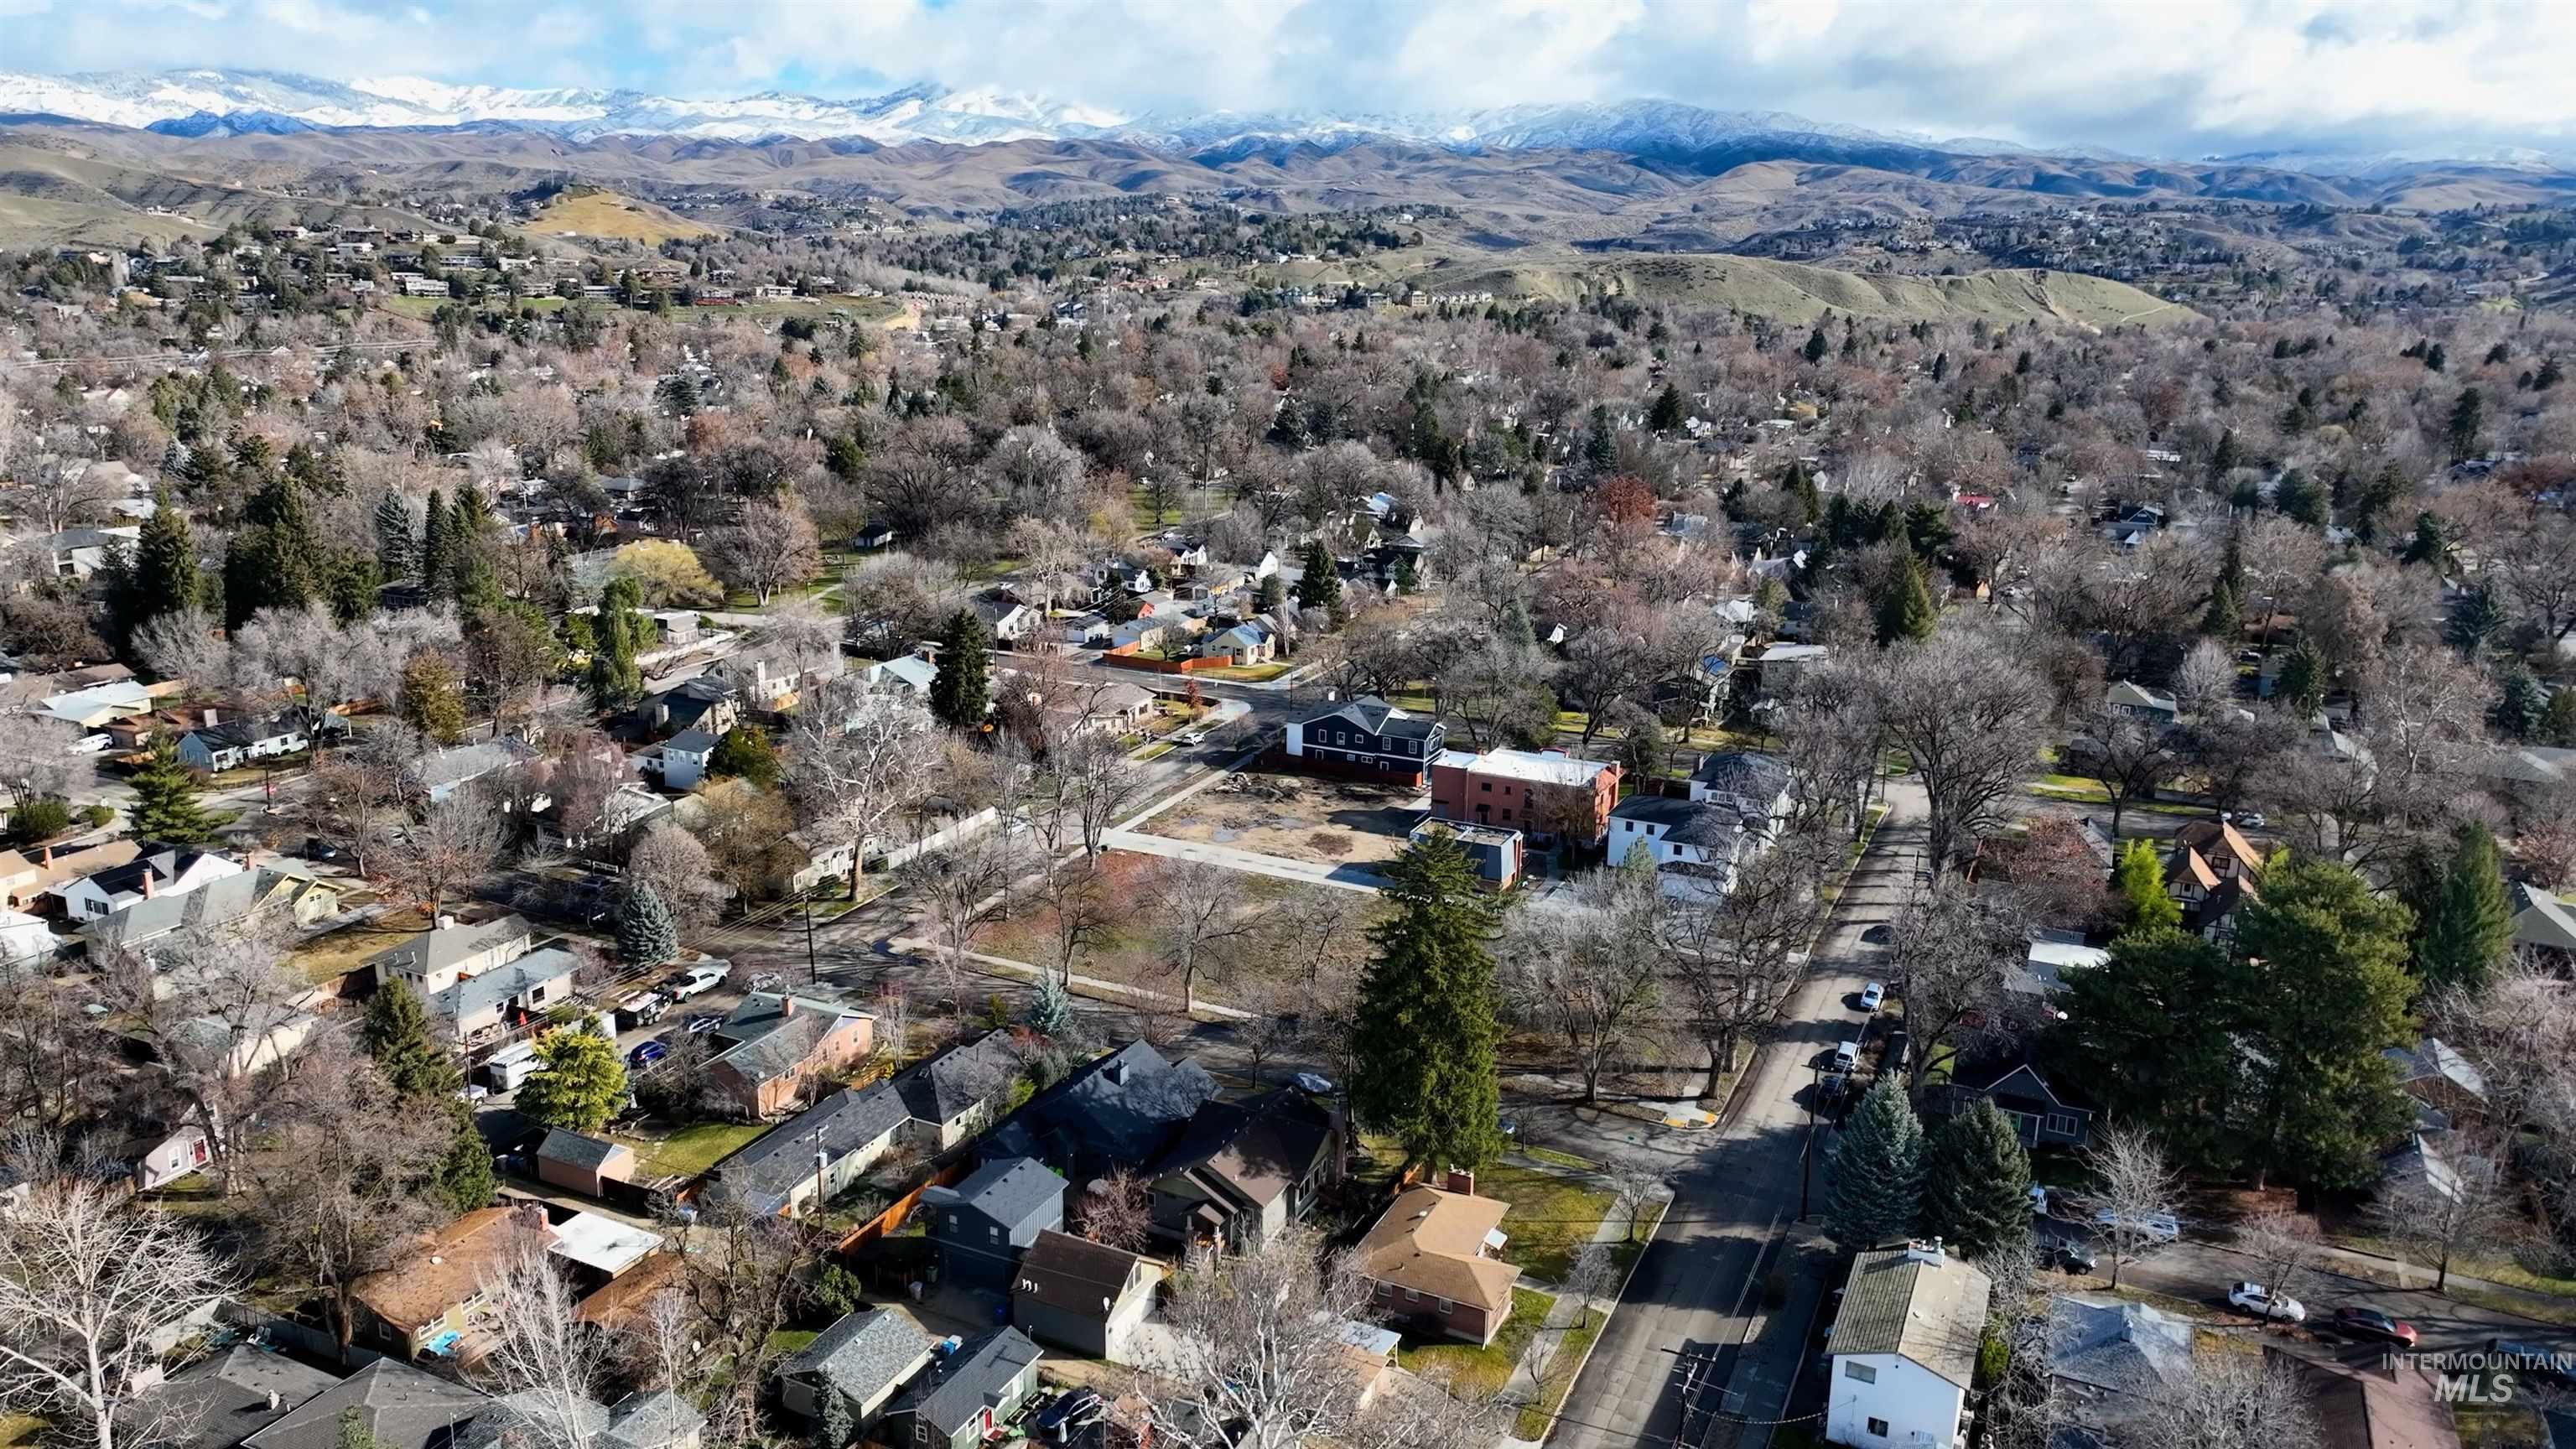 1604 N 25th St., Boise, Idaho 83702, Land For Sale, Price $495,000,MLS 98902341